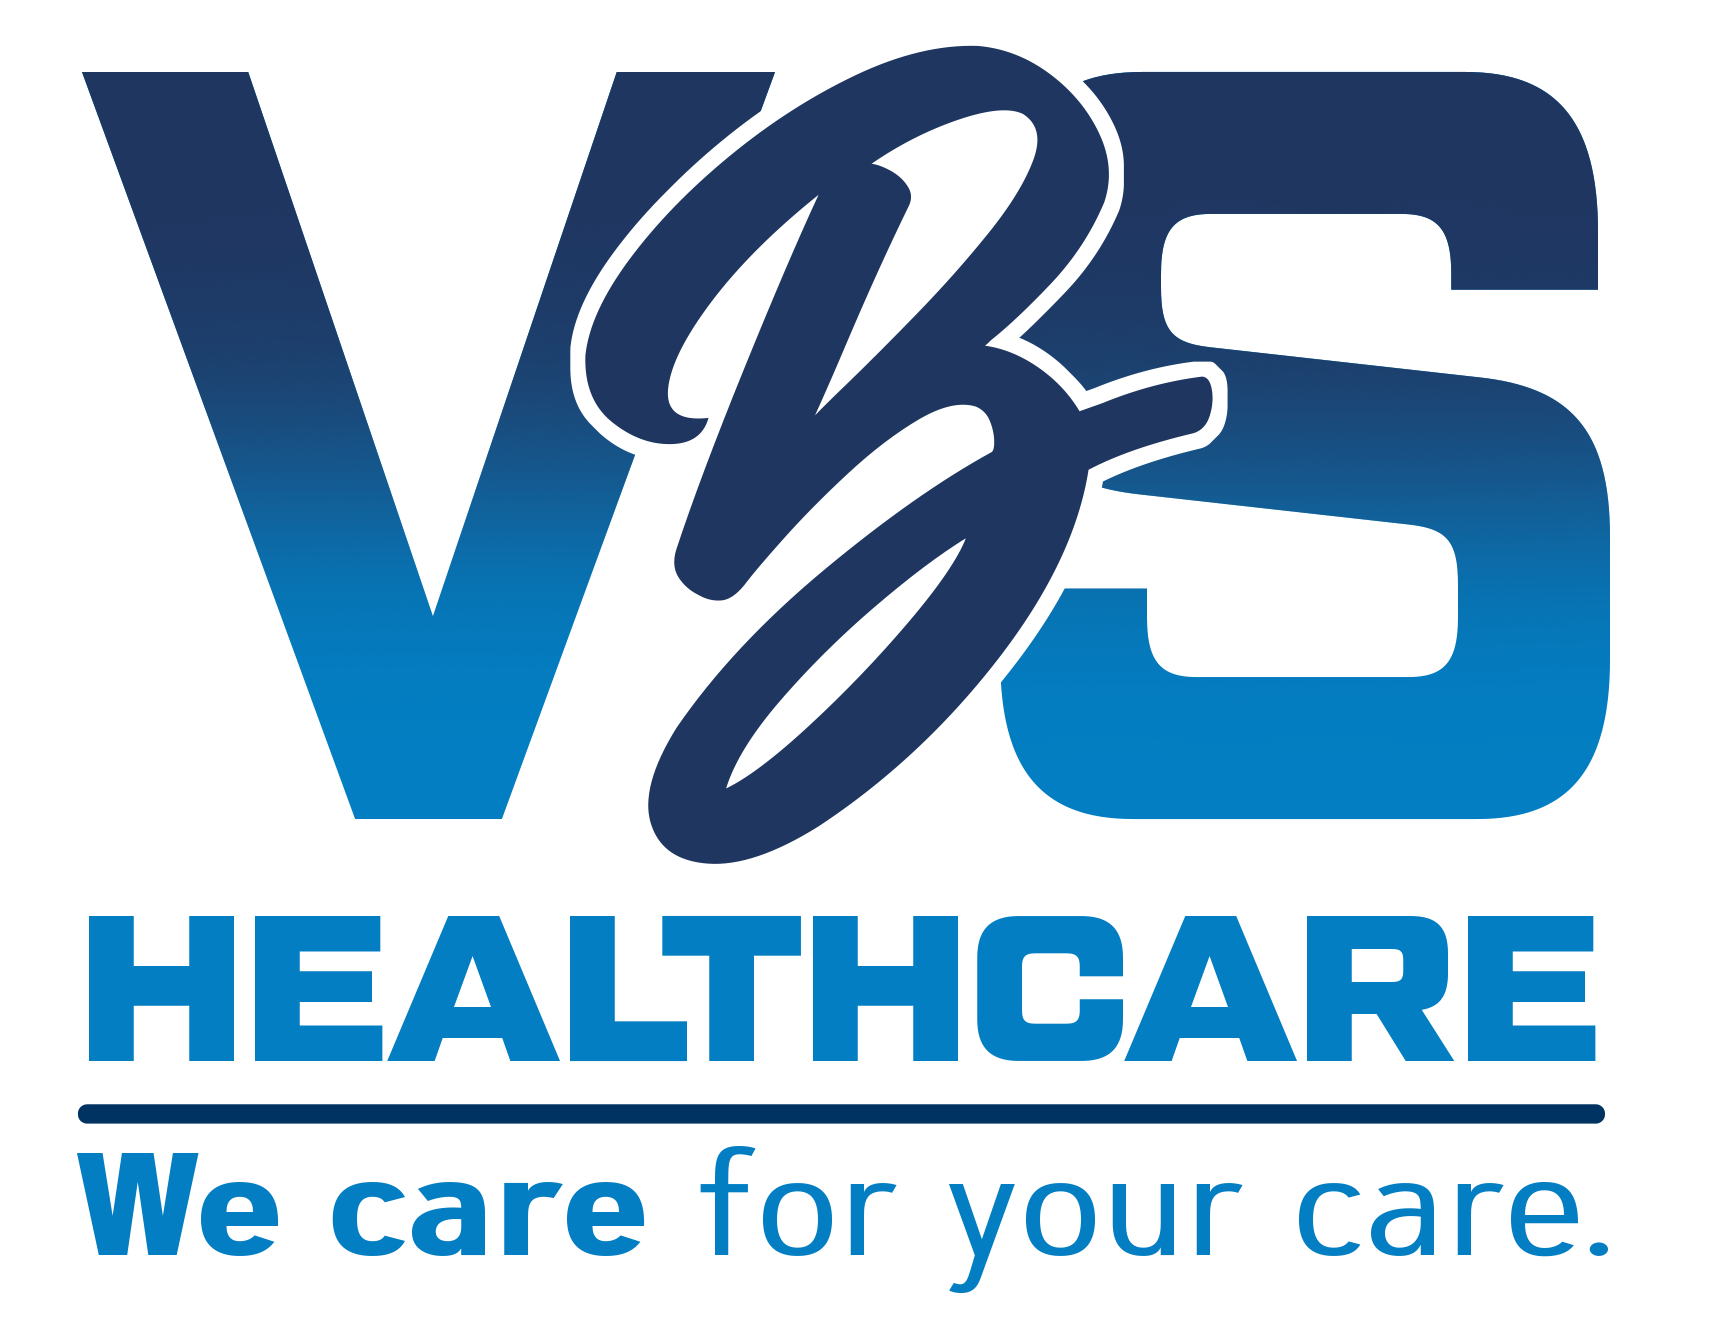 VBS Healthcare in blue writing